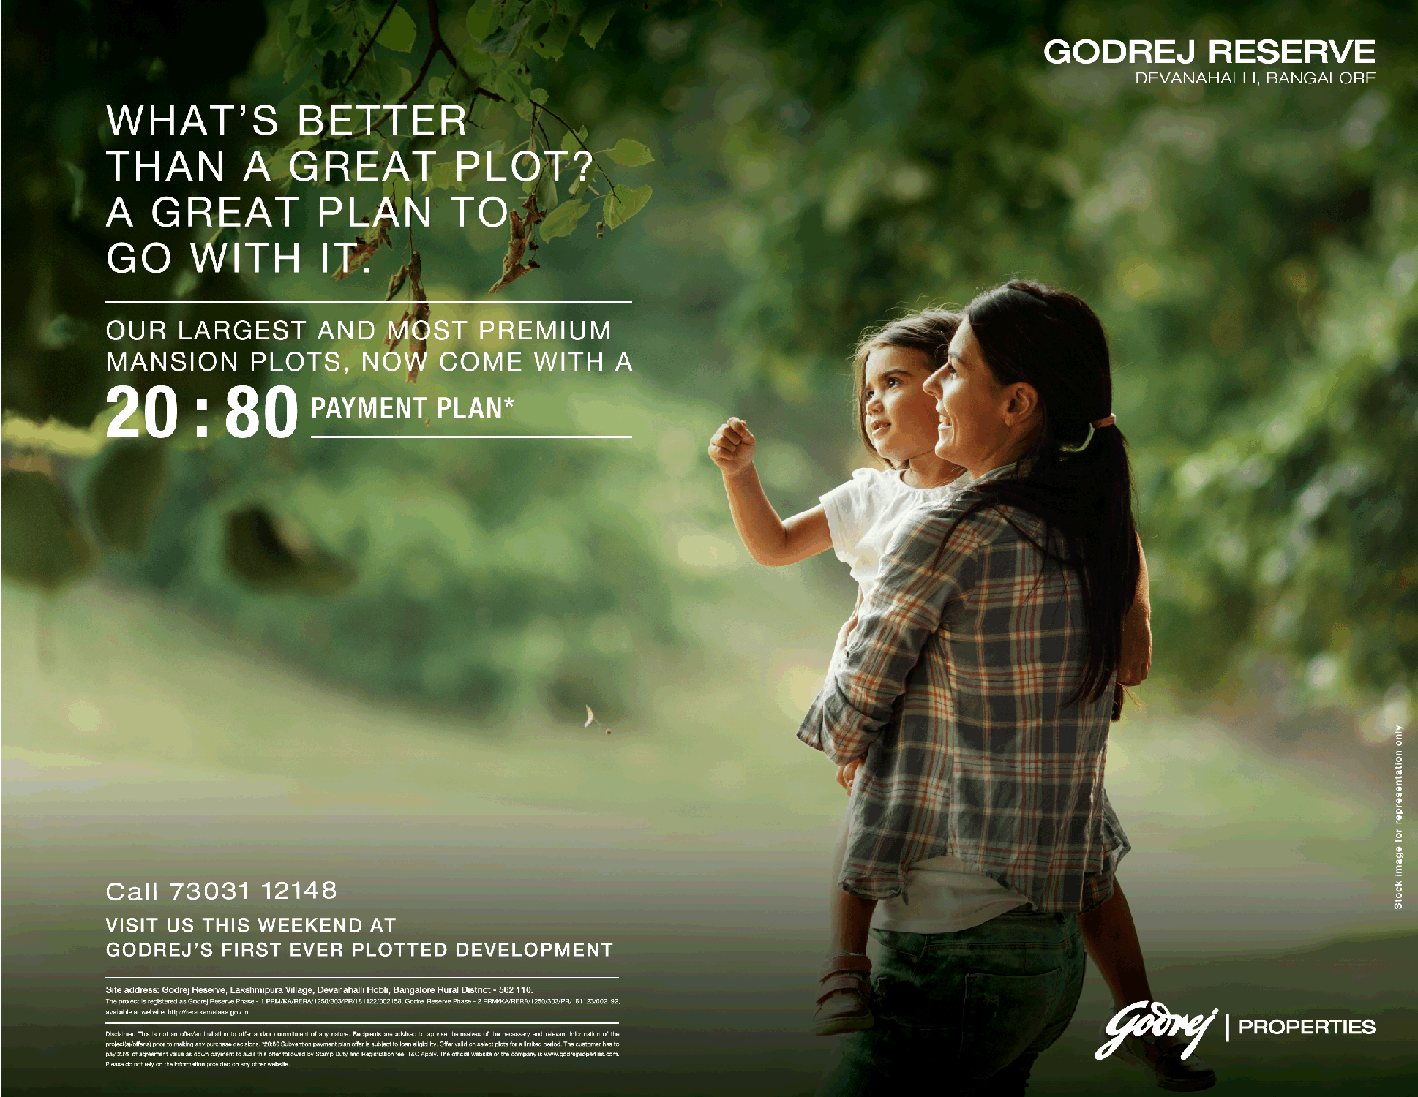 godrej-properties-our-largest-and-most-premium-mansion-plots-ad-times-of-india-bangalore-18-01-2019.png